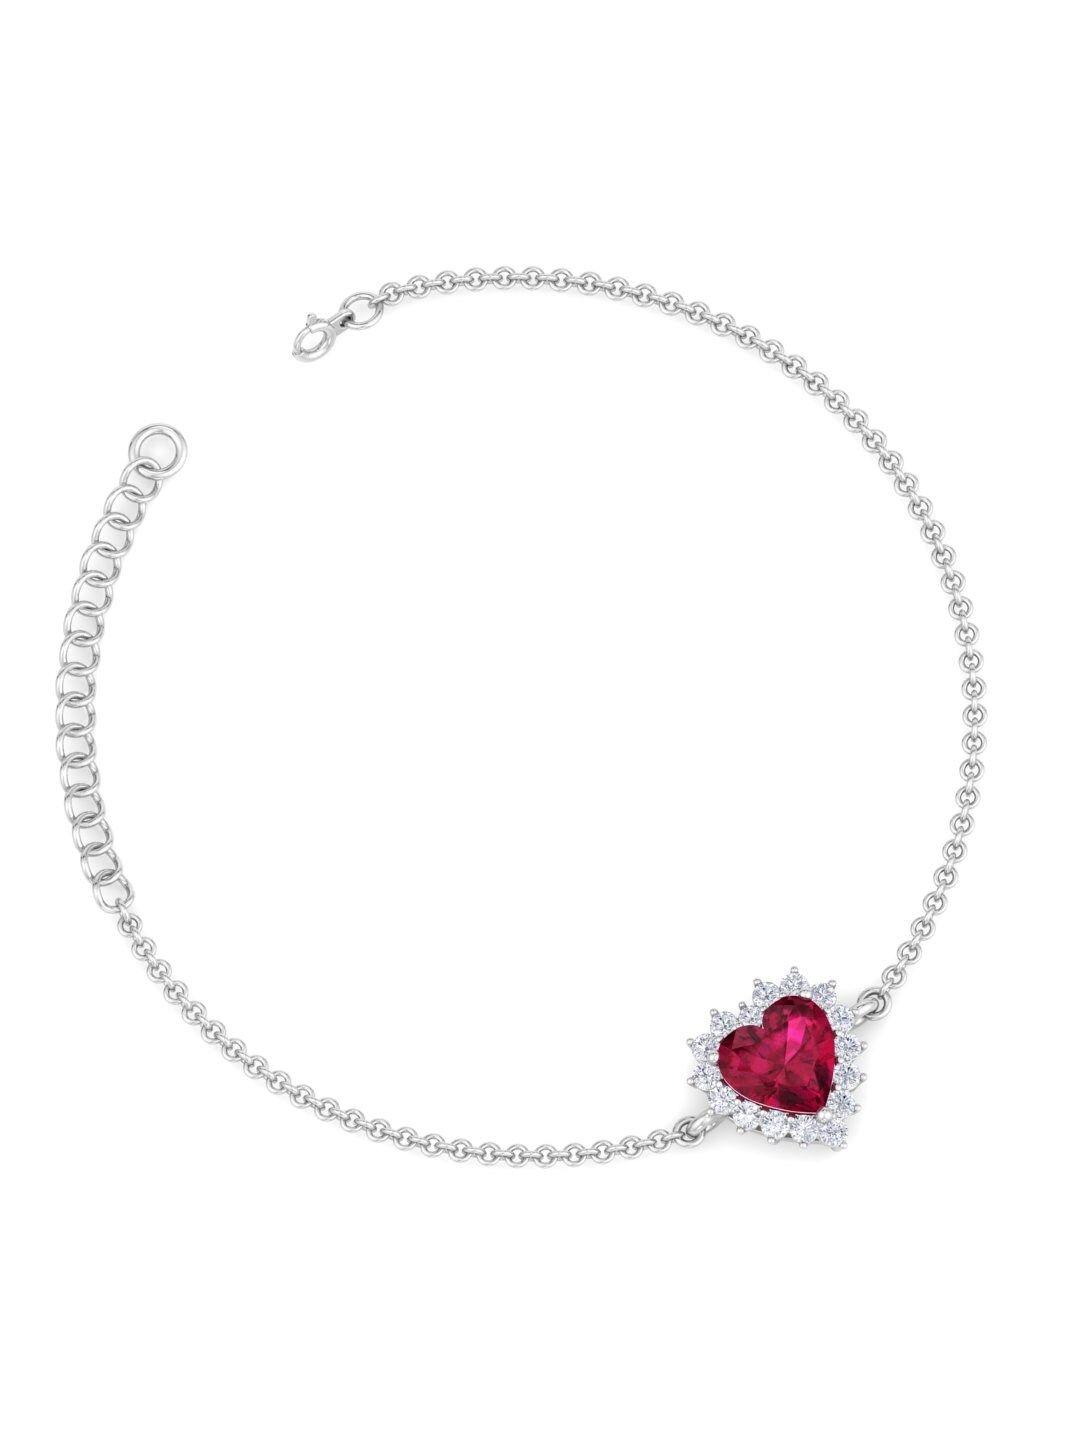 inddus jewels 925 sterling silver rhodium-plated cubic zirconia heart shaped link bracelet